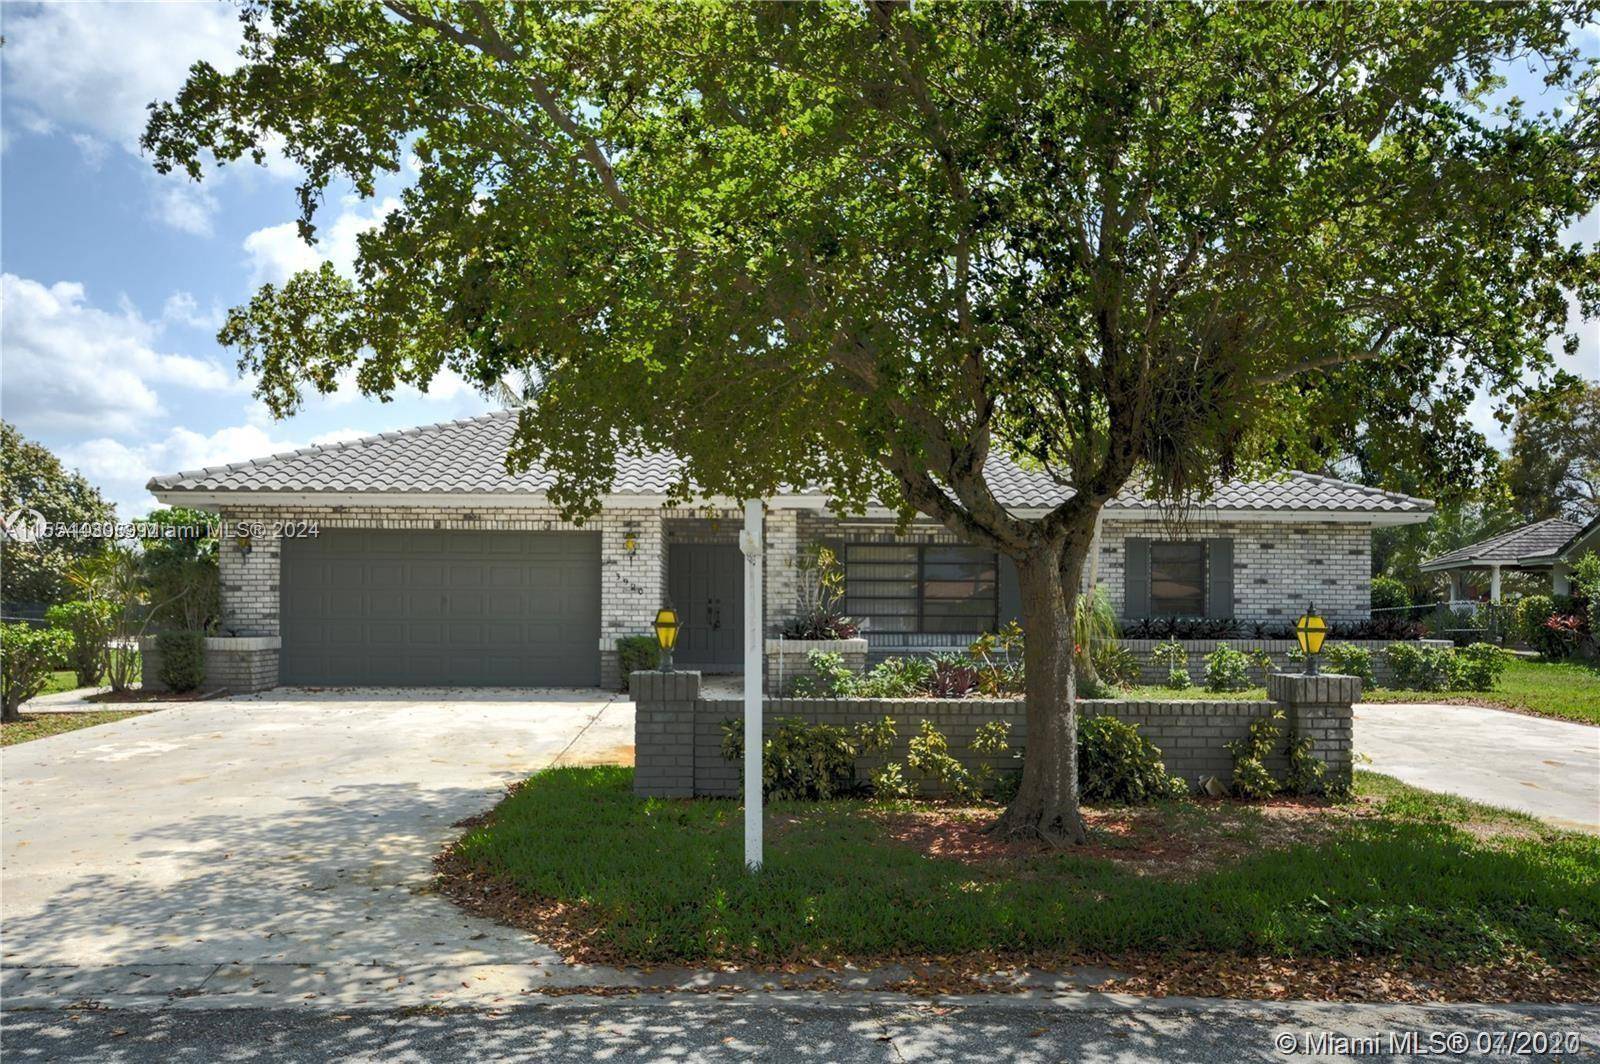 Welcome to this spacious 4 bedroom, 3 bathroom single family home in beautiful Coral Springs.